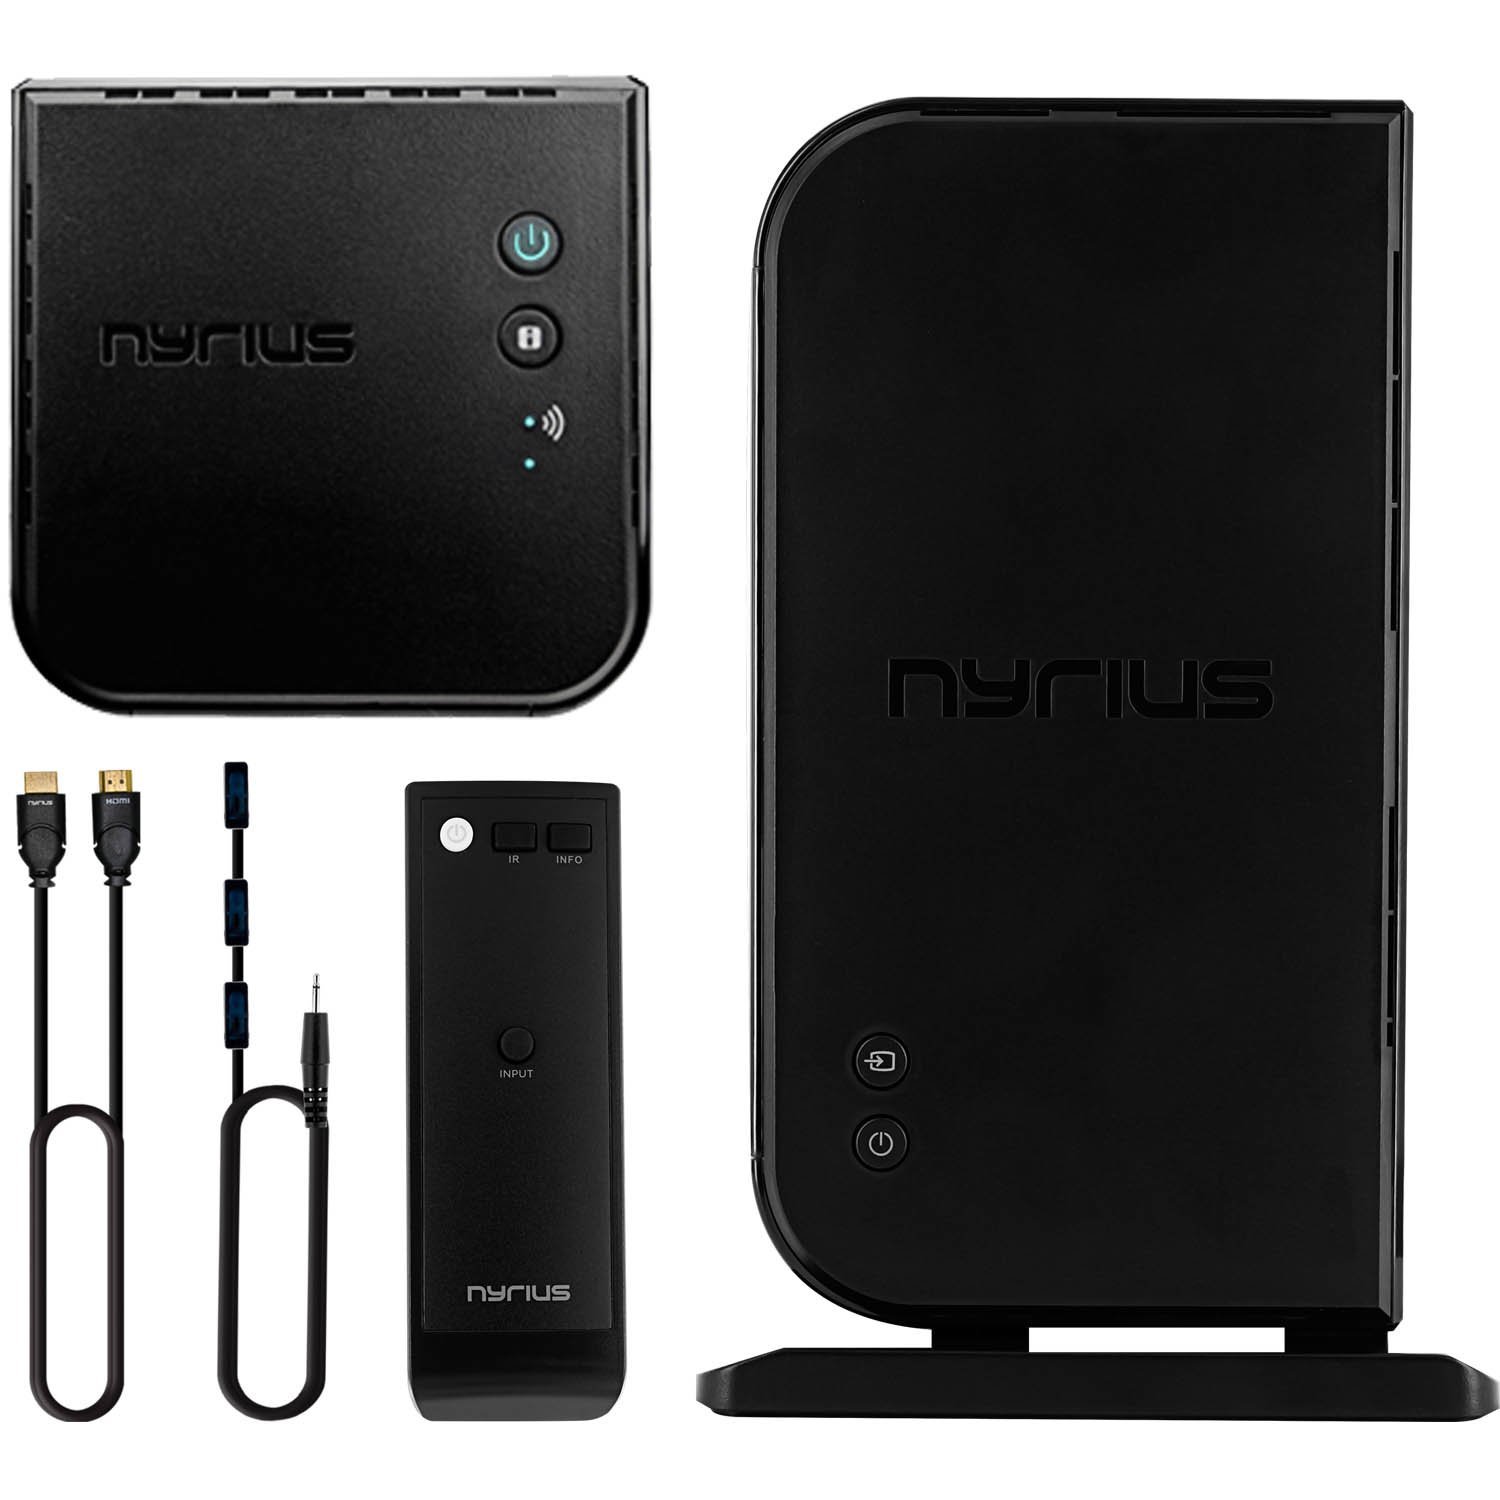 Nyrius ARIES Home+ Wireless HDMI 2x Input Transmitter & Receiver for Streaming HD 1080p 3D Video and Digital Audio from Cable box, Satellite, Bluray, DVD, PS4, PS3, Xbox One/360, Laptops, PC (NAVS502)